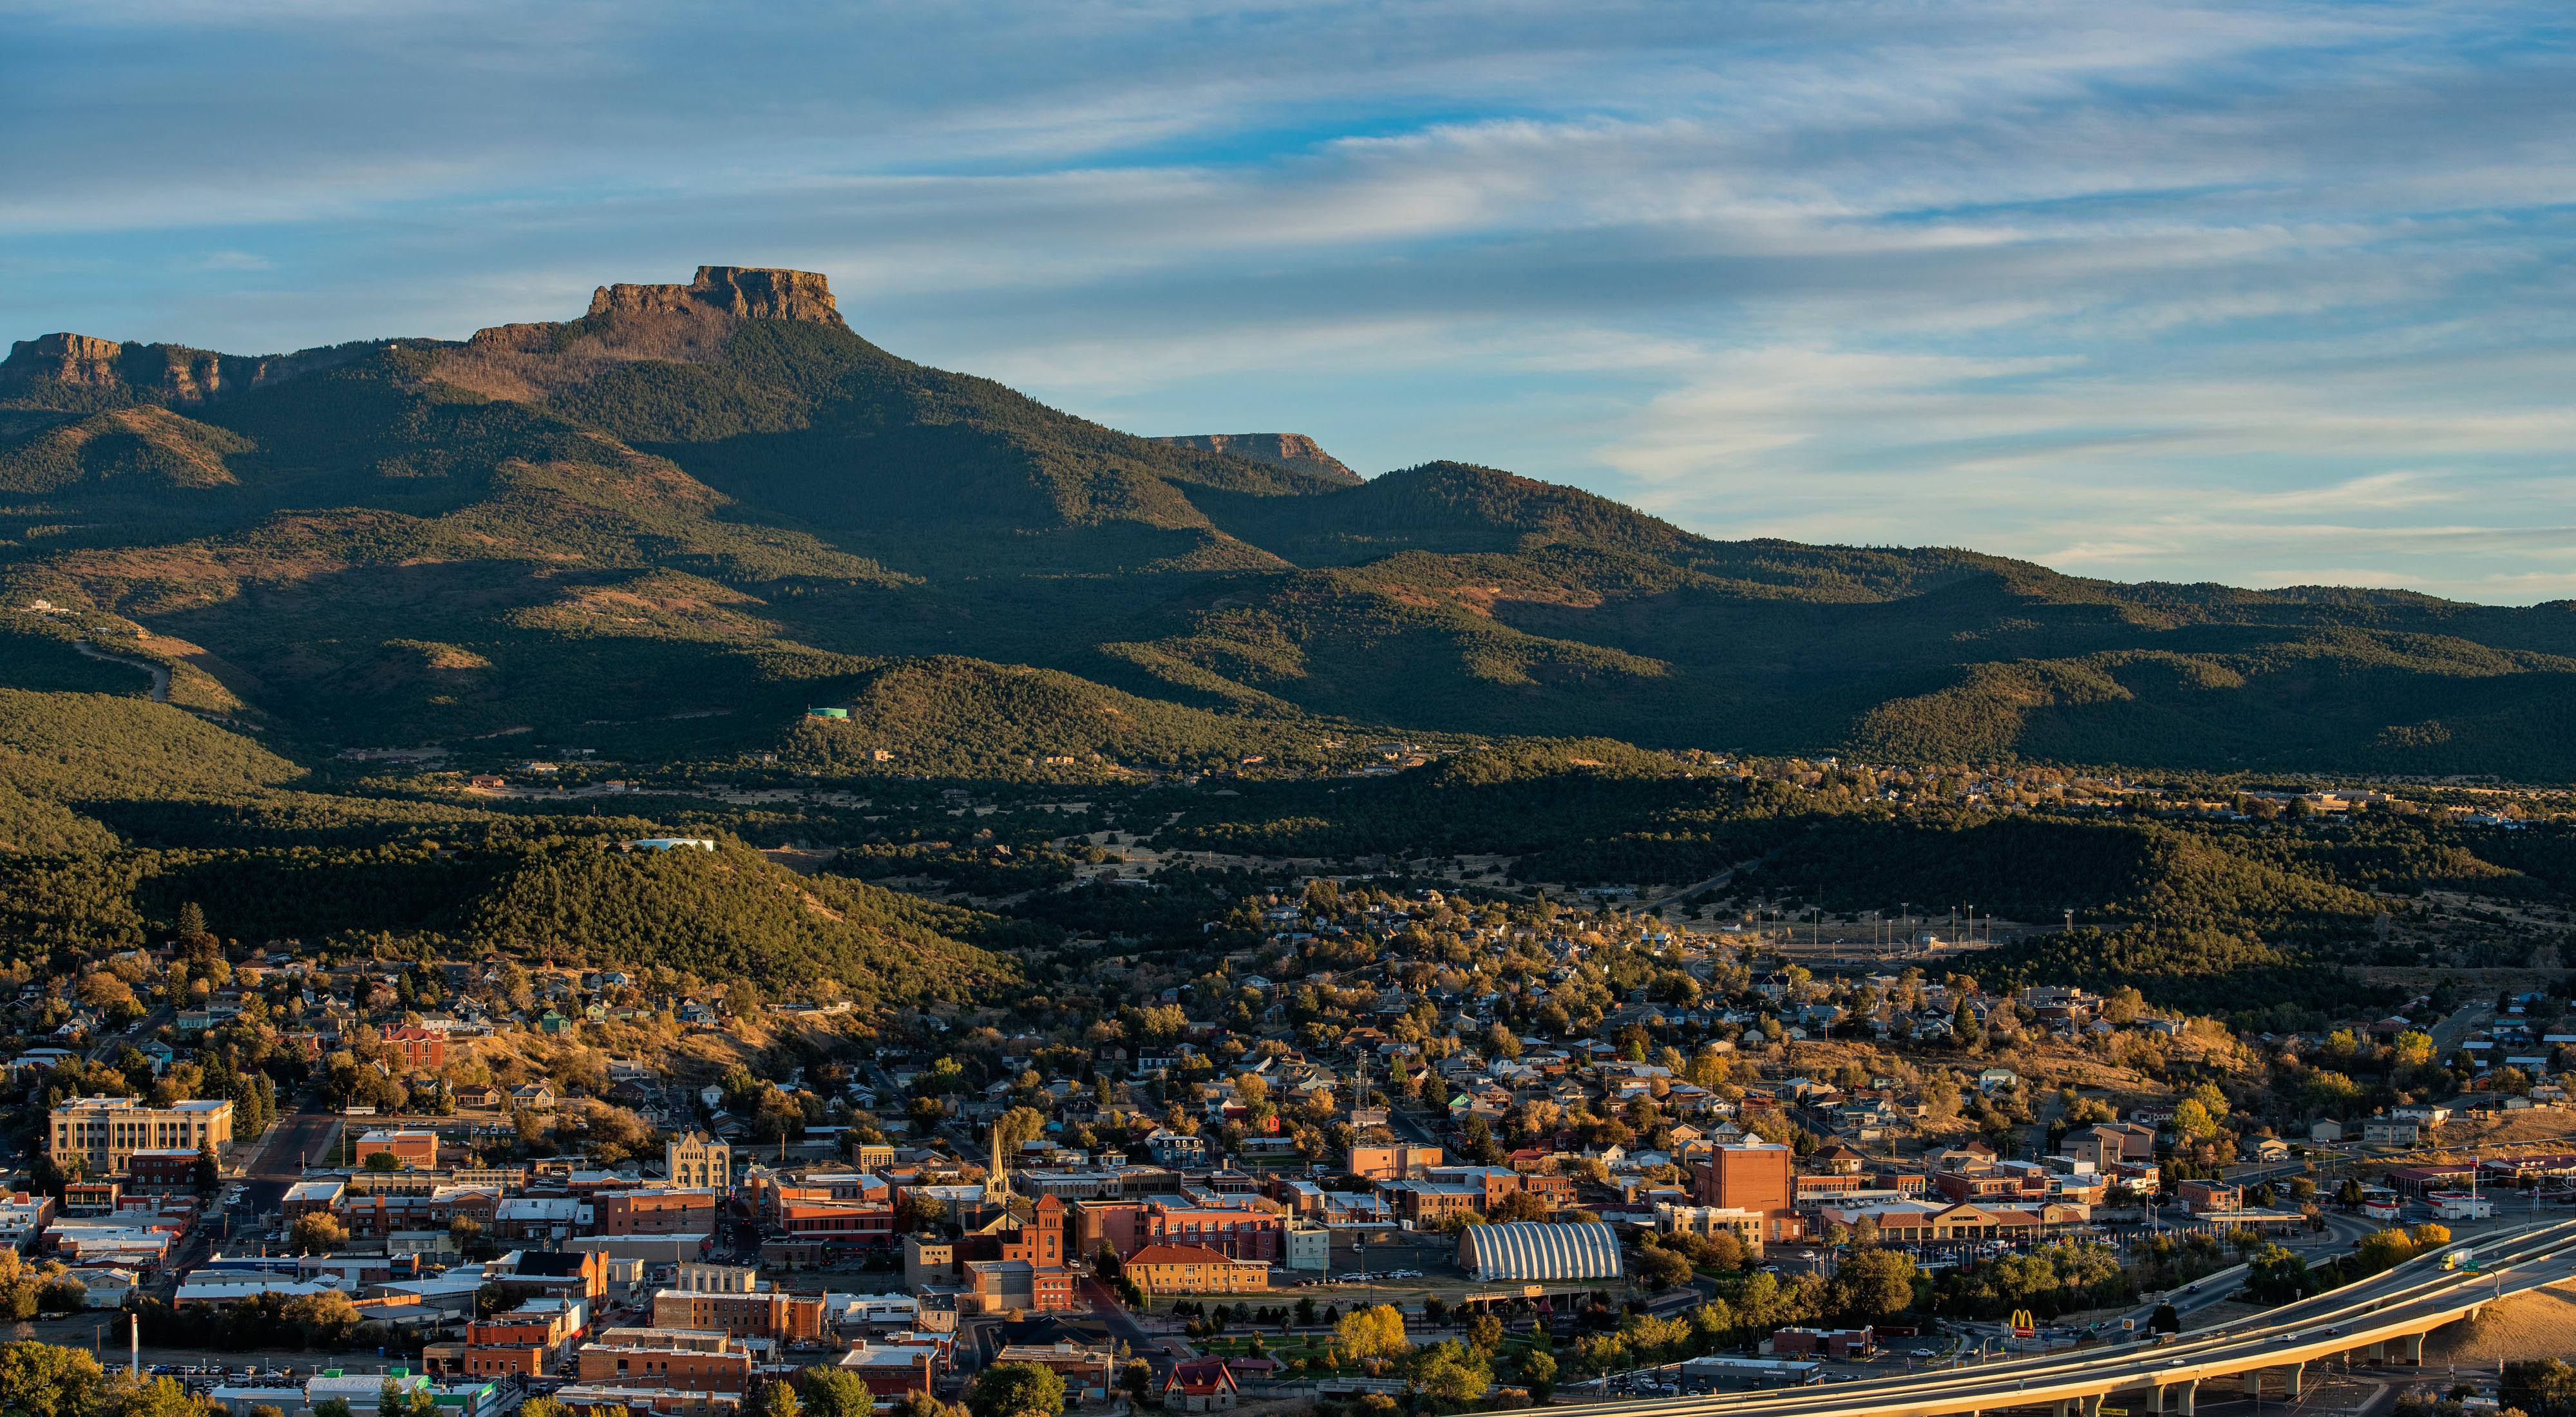 Fishers Peak forms a backdrop to the town of Trinidad, Colorado